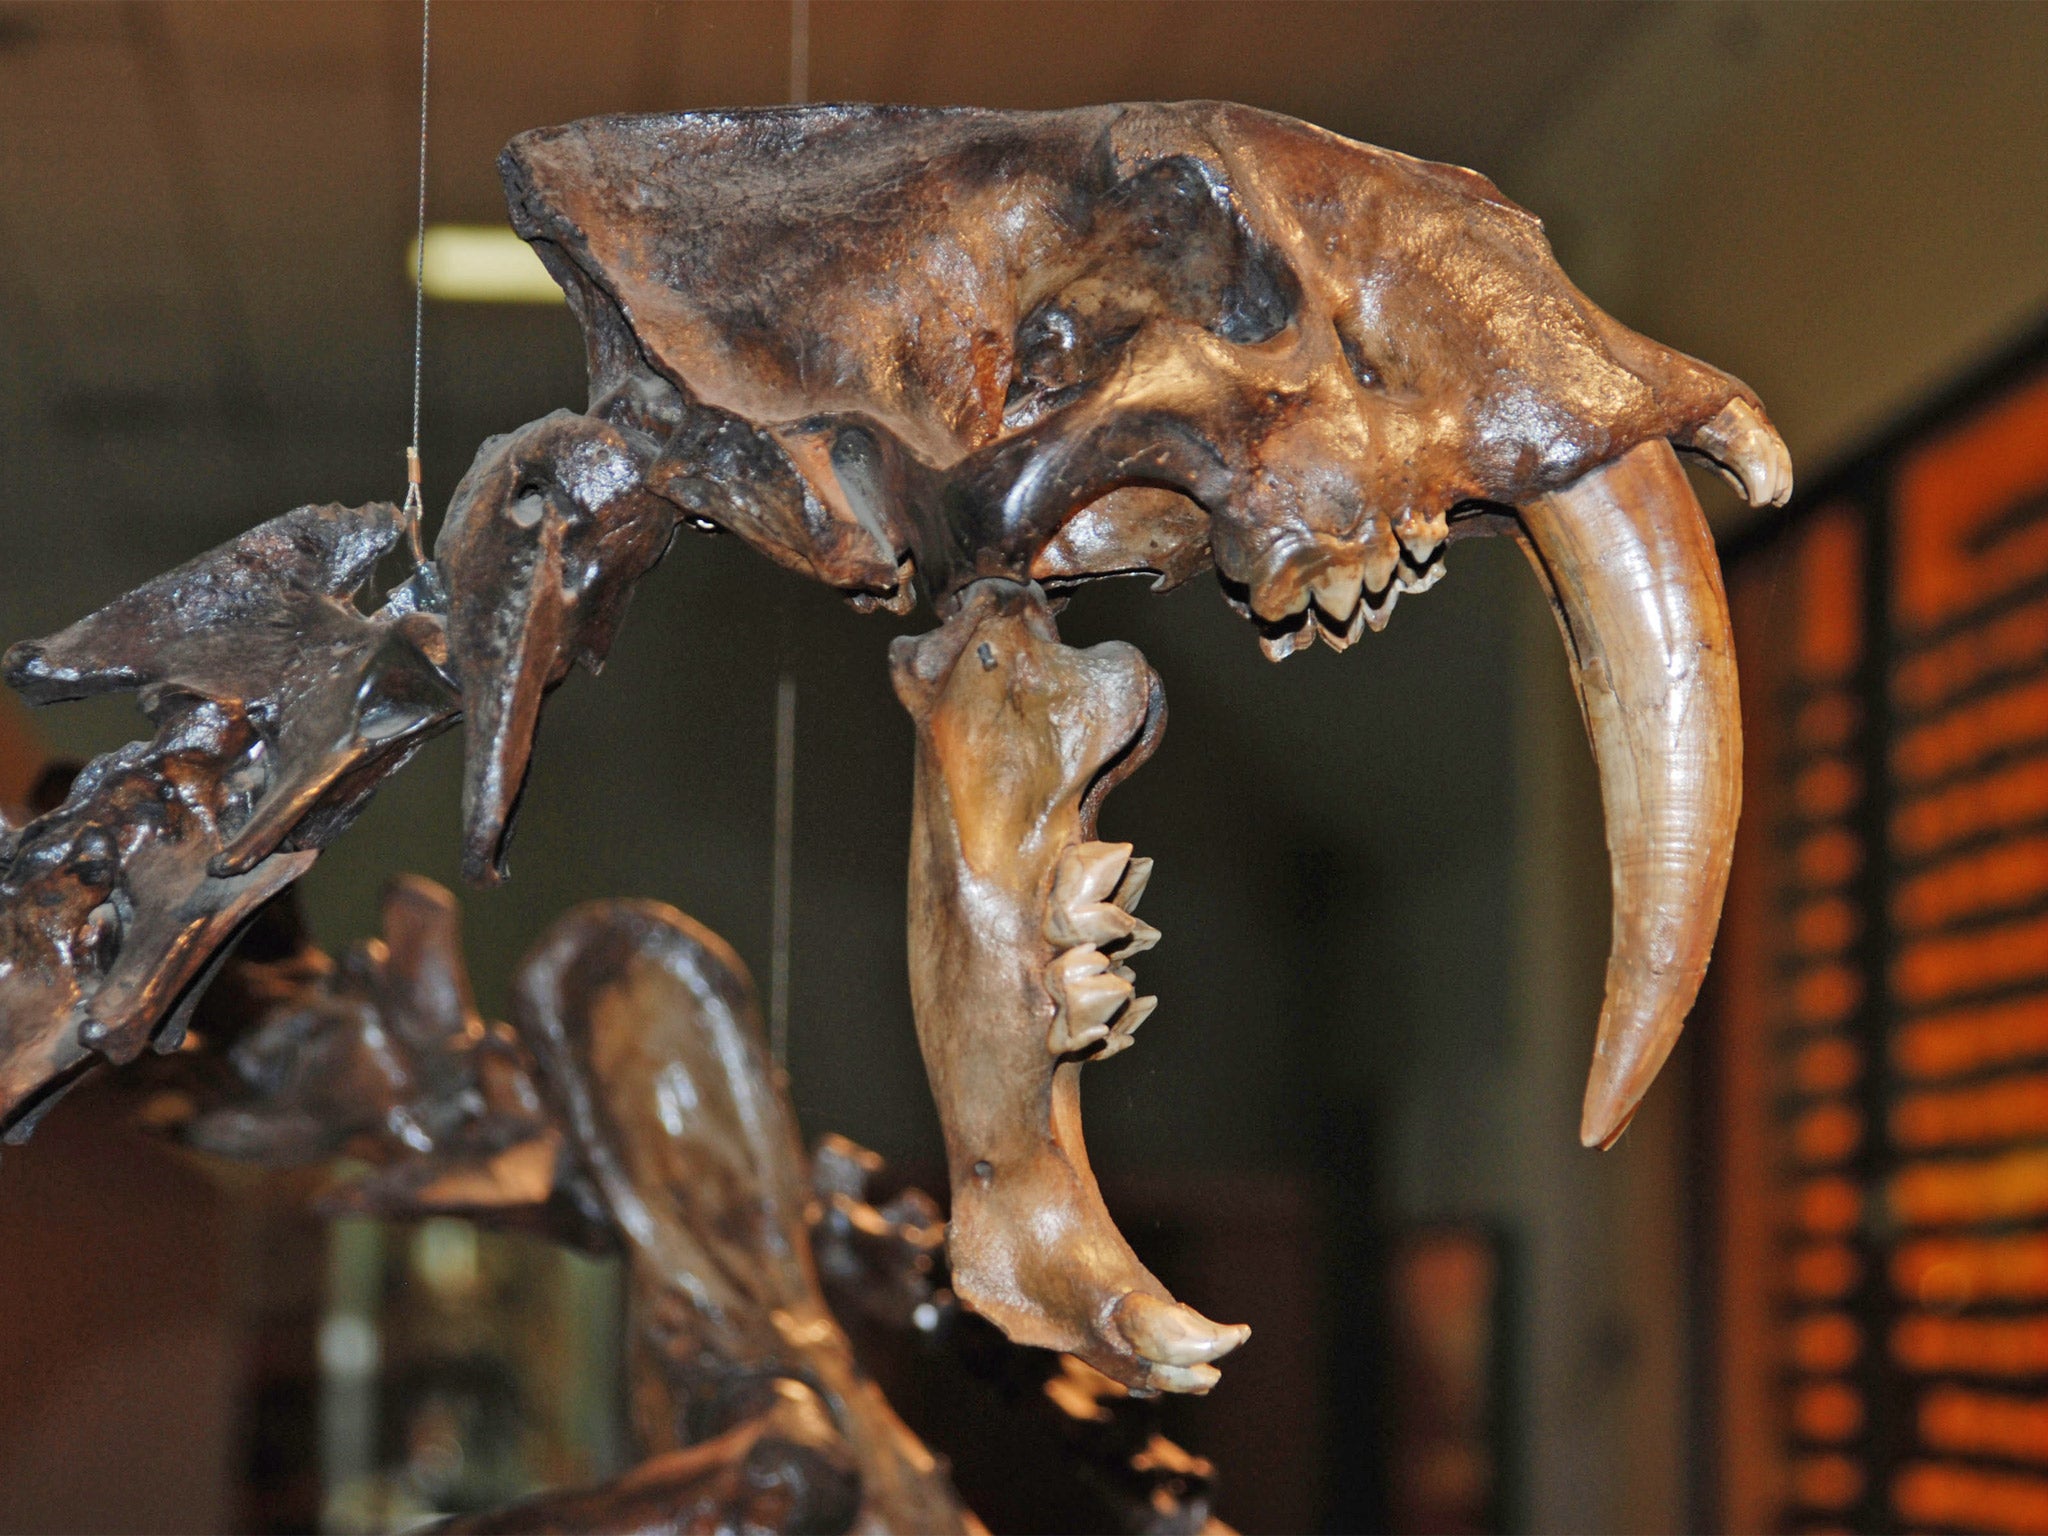 A skull of a saber-toothed cat exhibited at the Page Museum at the La Brea Tar Pits in Los Angeles